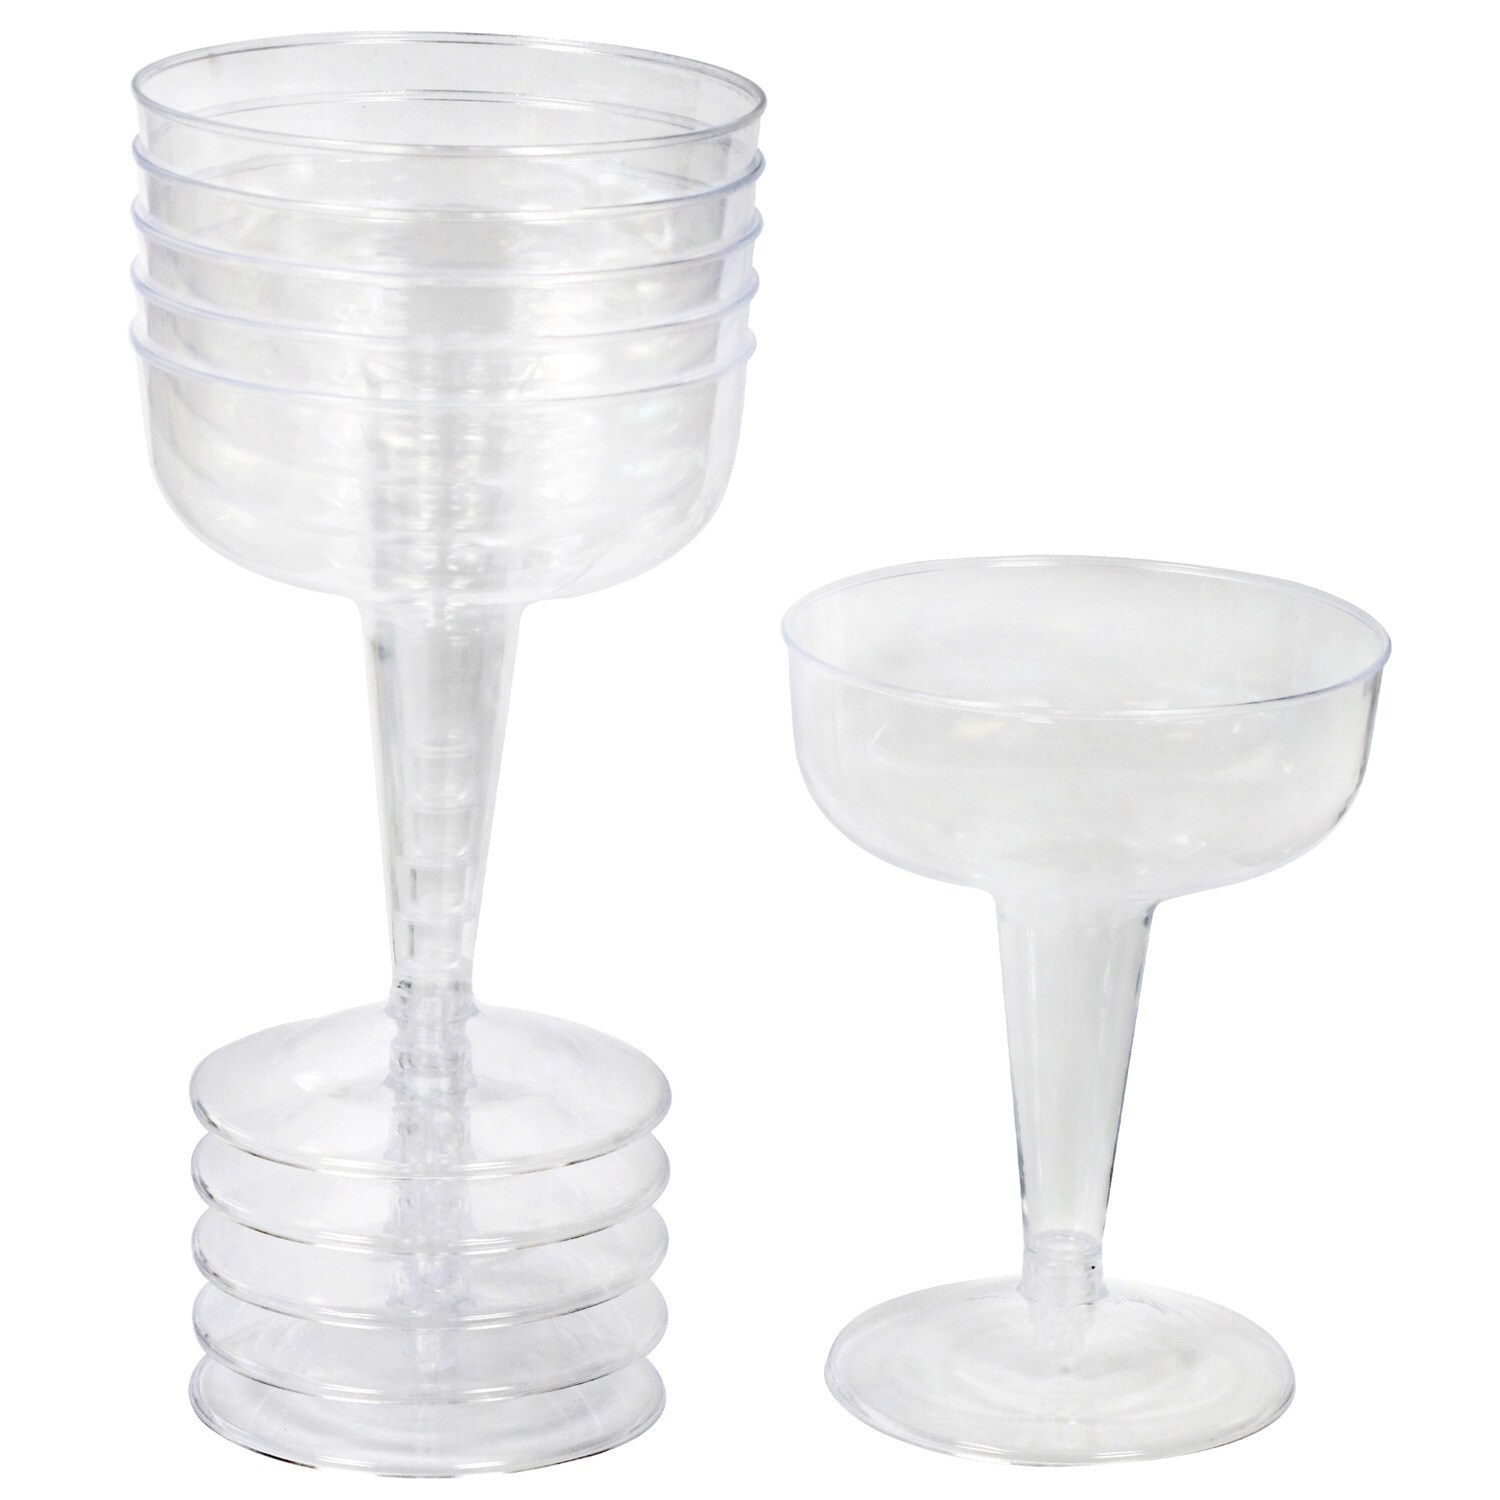 Finishes Touches Party Store 12 Disposable Clear Plastic Glasses Champagne Coupe 